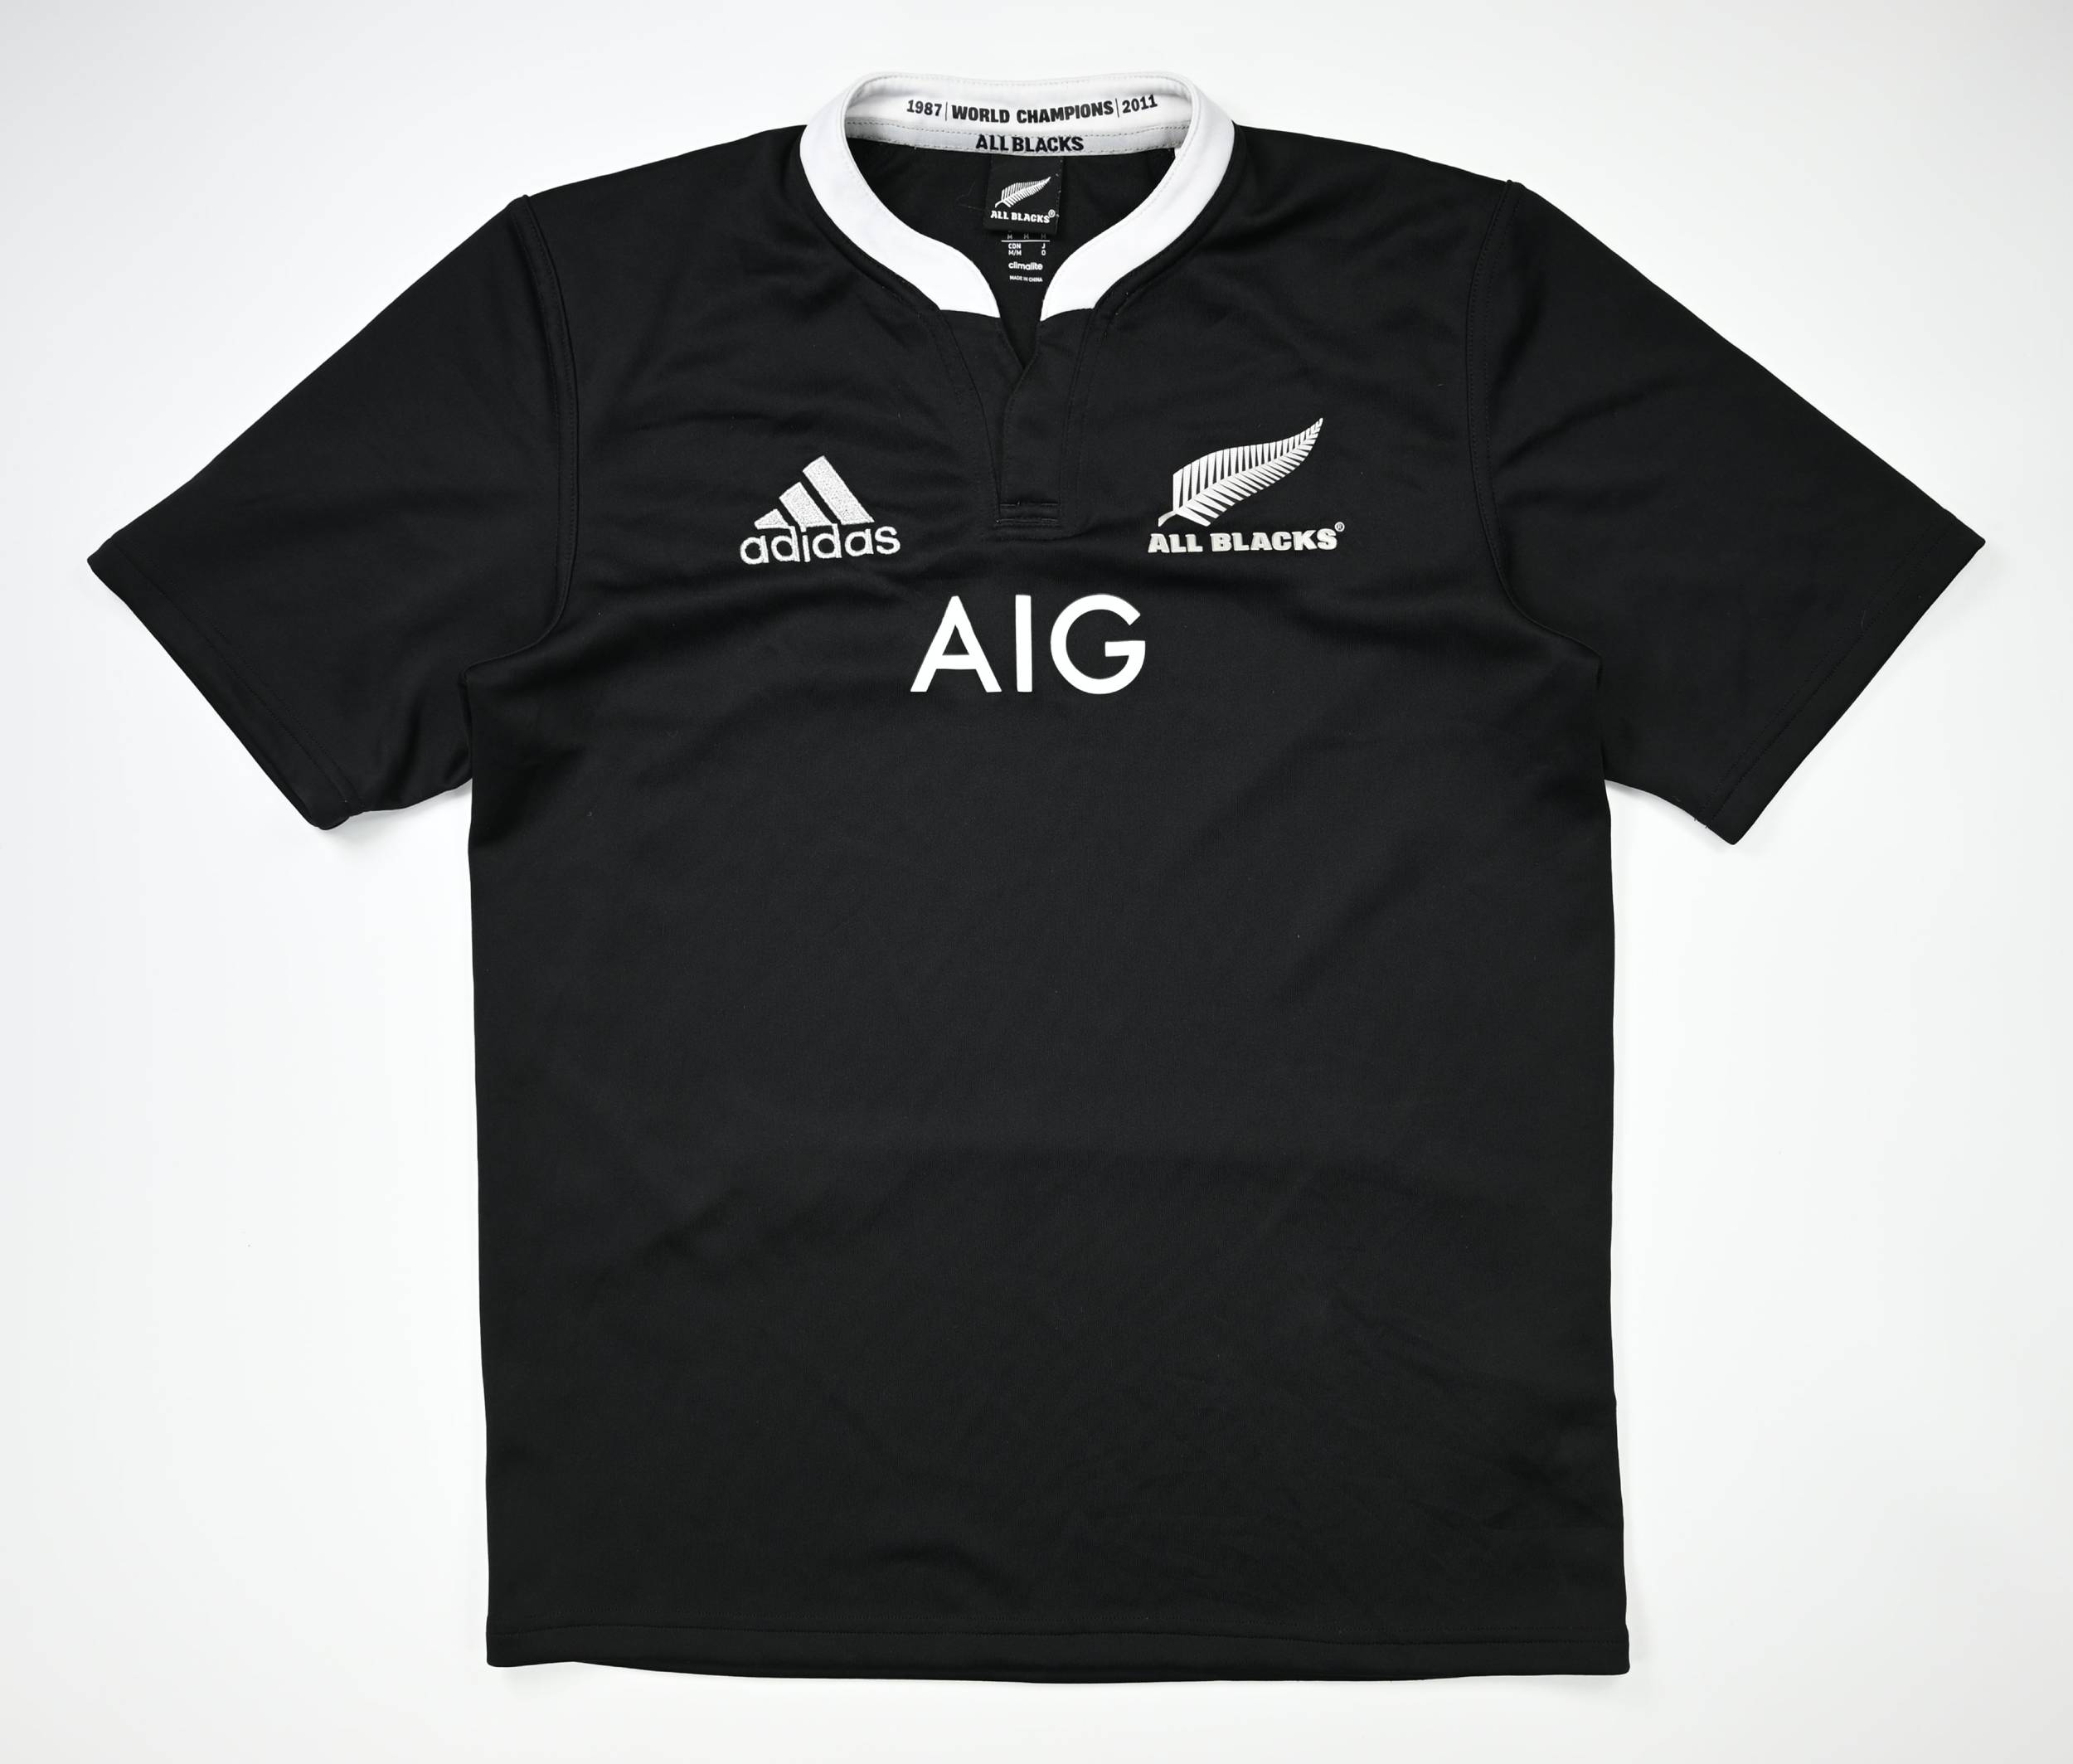 ALL BLACKS NEW ZEALAND RUGBY SHIRT M Rugby \ Rugby League \ New Zealand ...